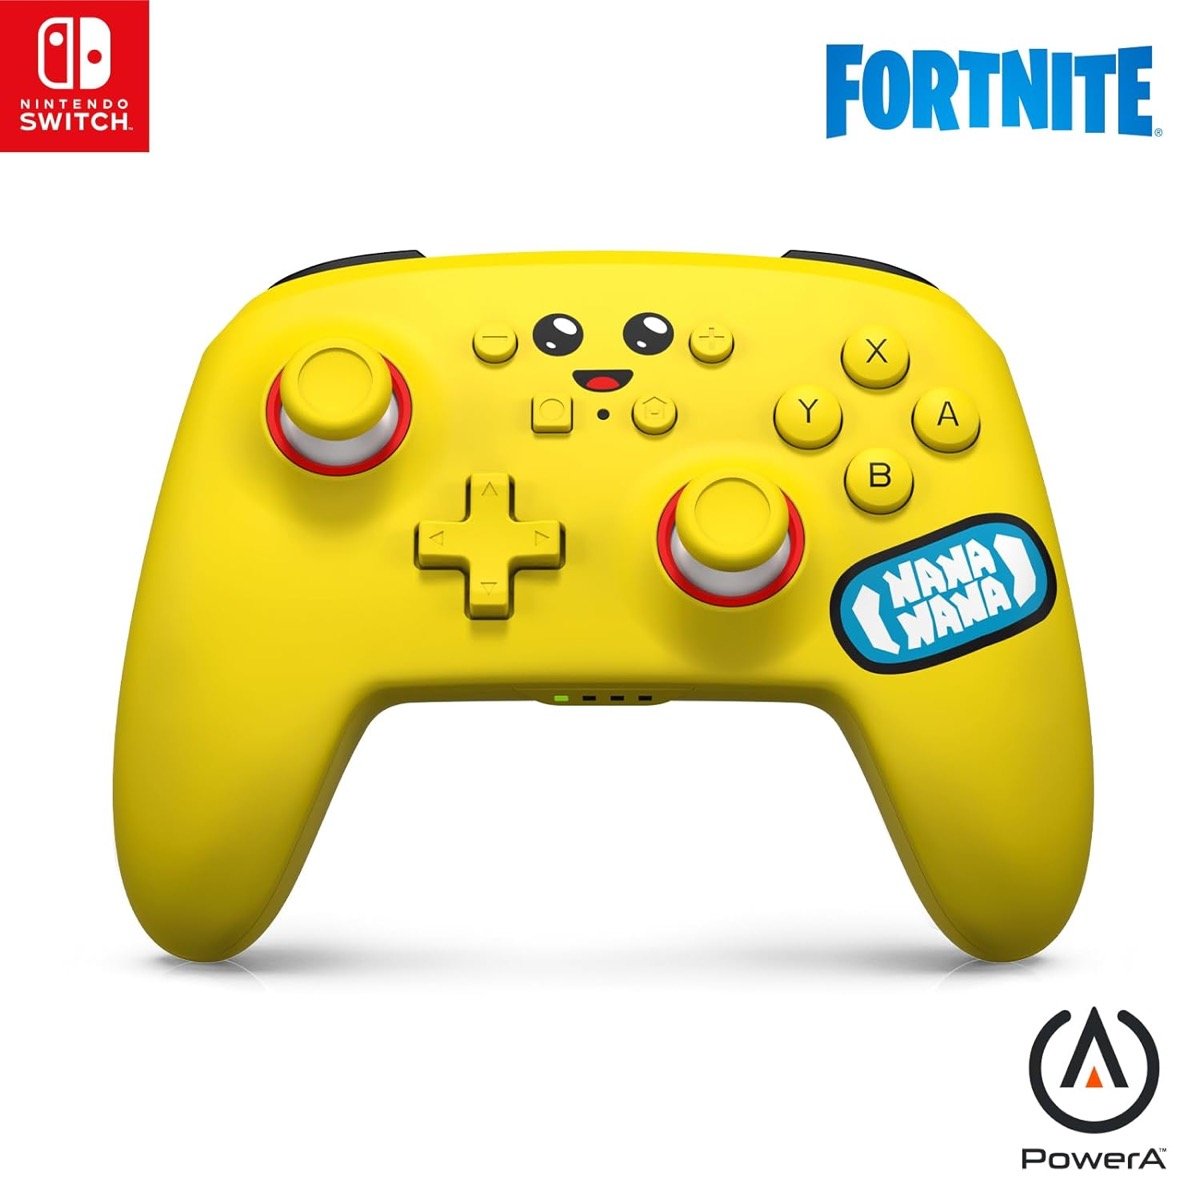 A "Fortnite" branded controller featuring a cartoon face